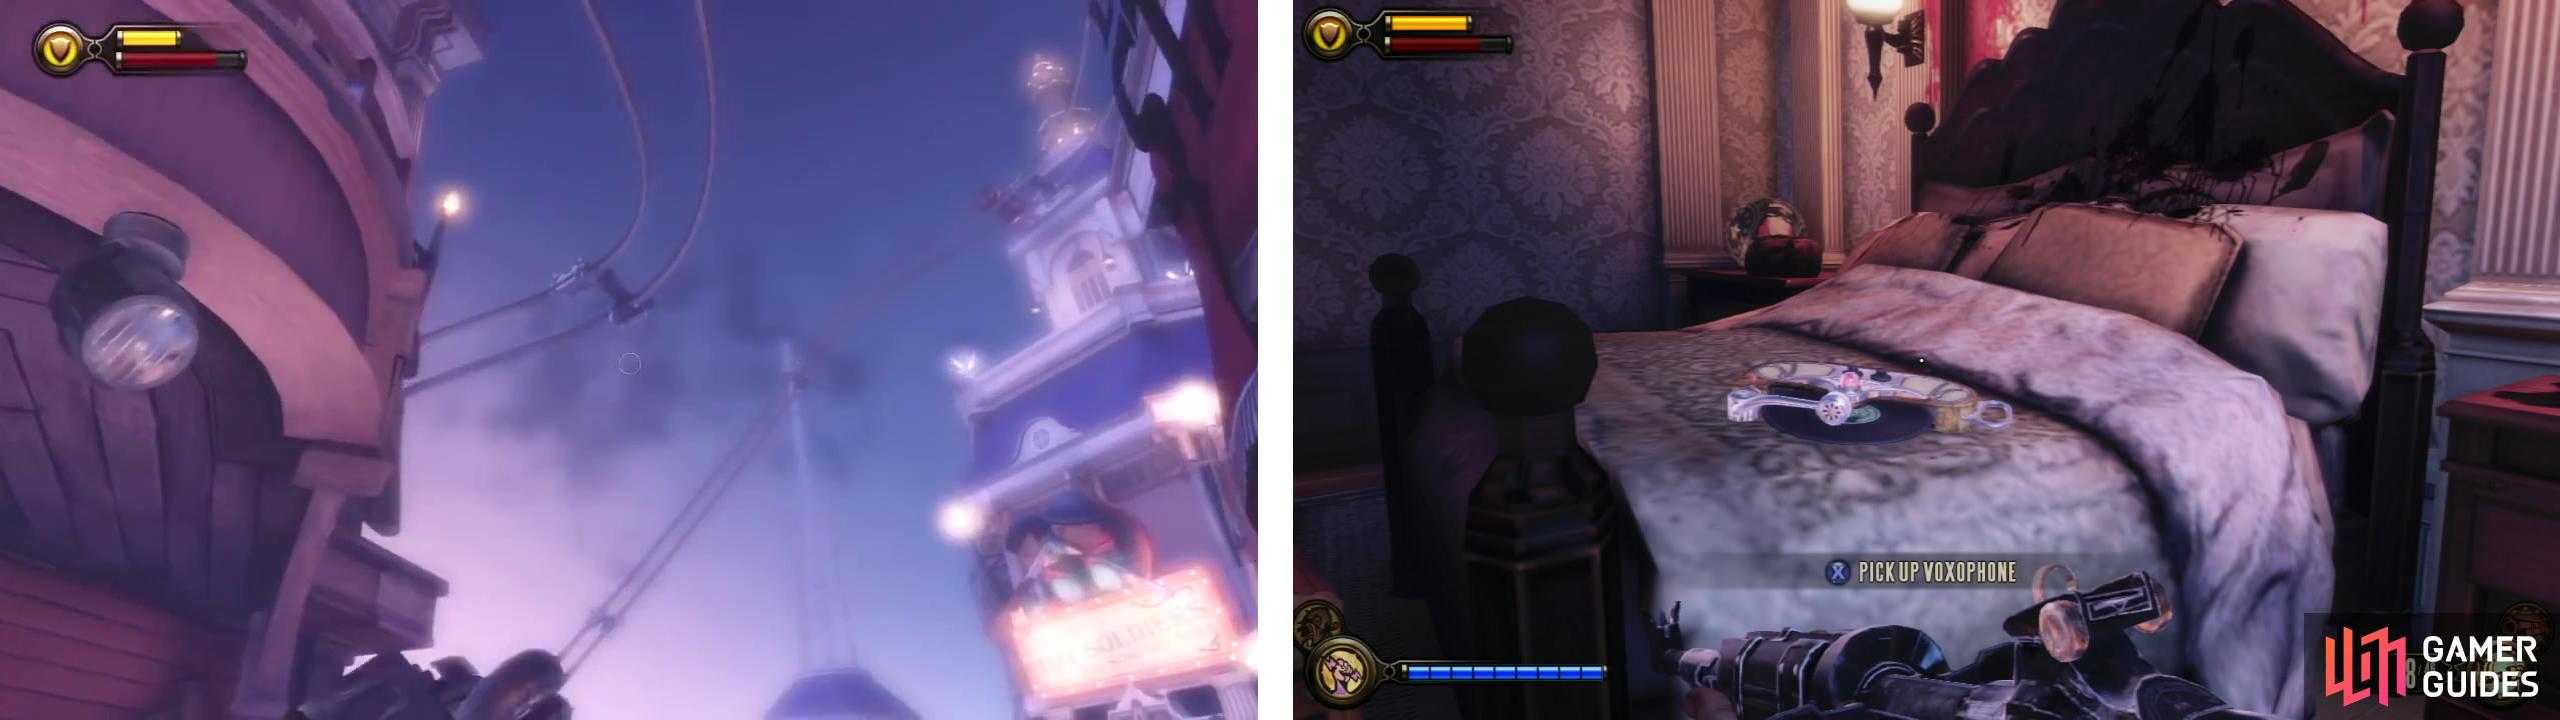 Use the skylines (left) to access the balcony of the central building, use shock jockey on the conduit and inside you’ll find a Voxophone (right).